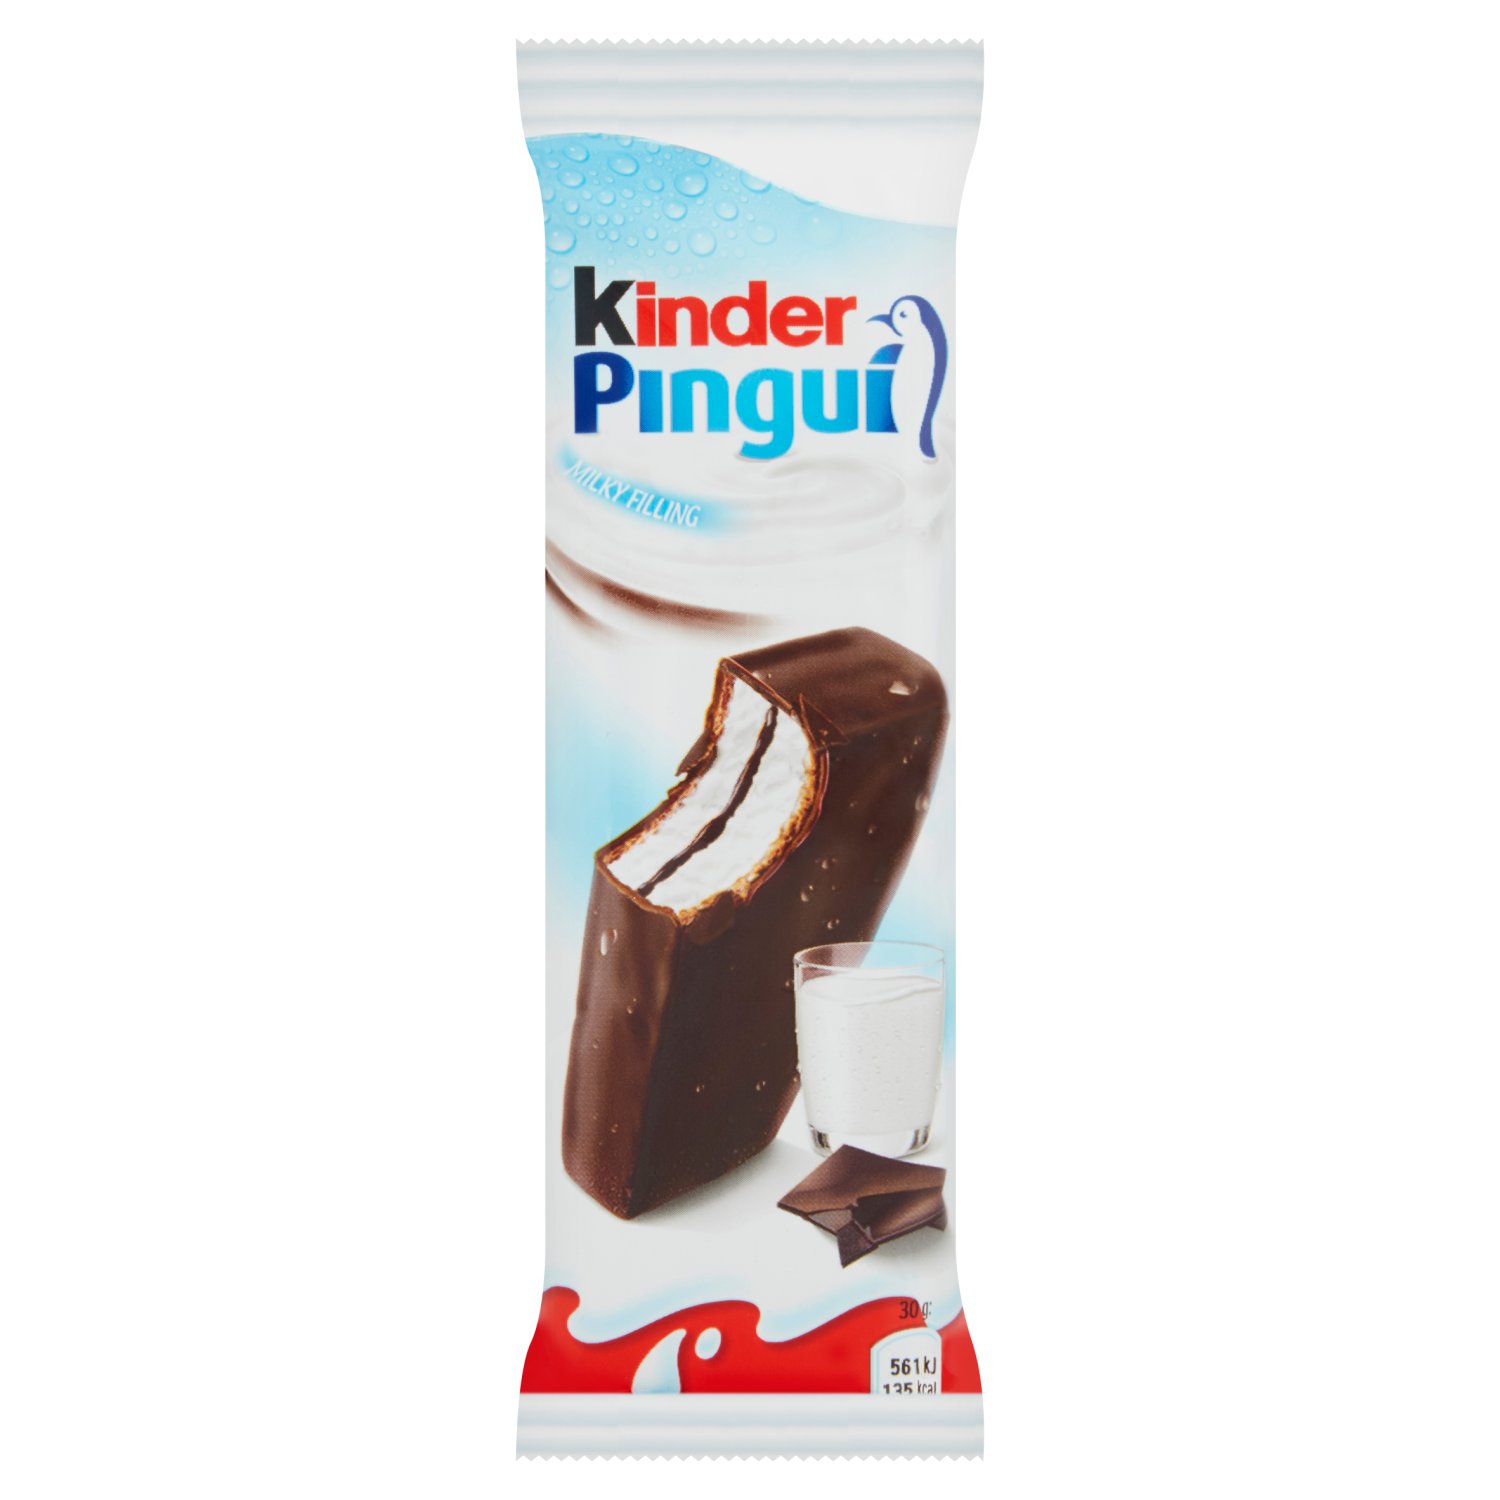 Kinder Pingui is a chilled and refreshing snack with a crispy layer of dark chocolate that gives way to a creamy milky filling and a cocoa cream centre. It's ideal as a treat or dessert for the whole family! 
